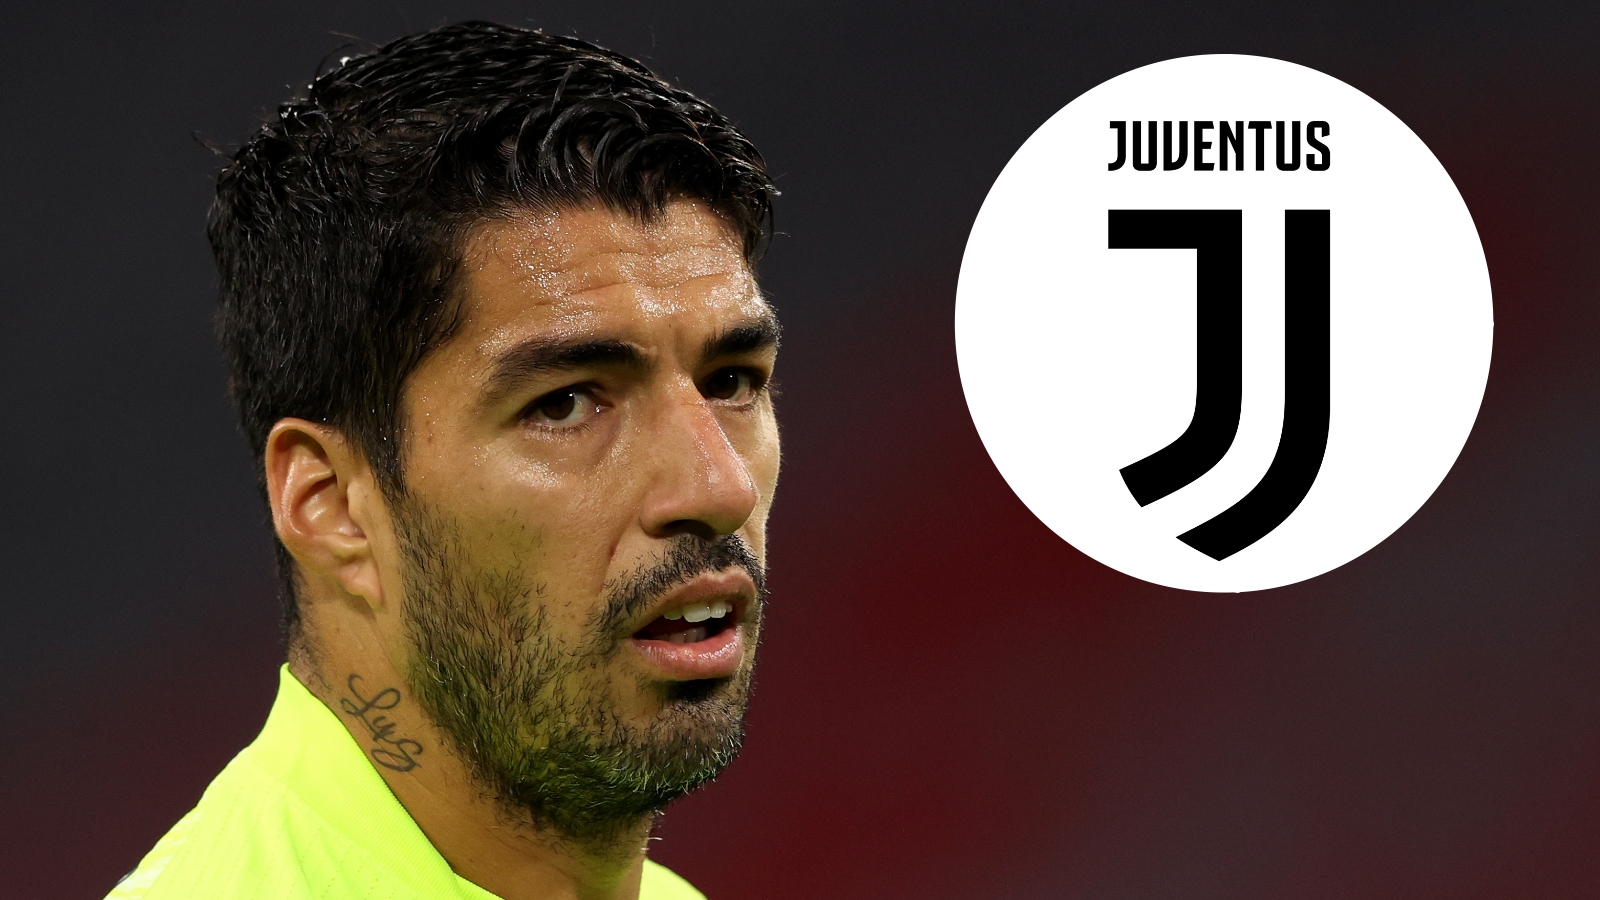 Juventus claim innocence after police confirm irregularities in Suarez citizenship test during failed transfer from Barcelona